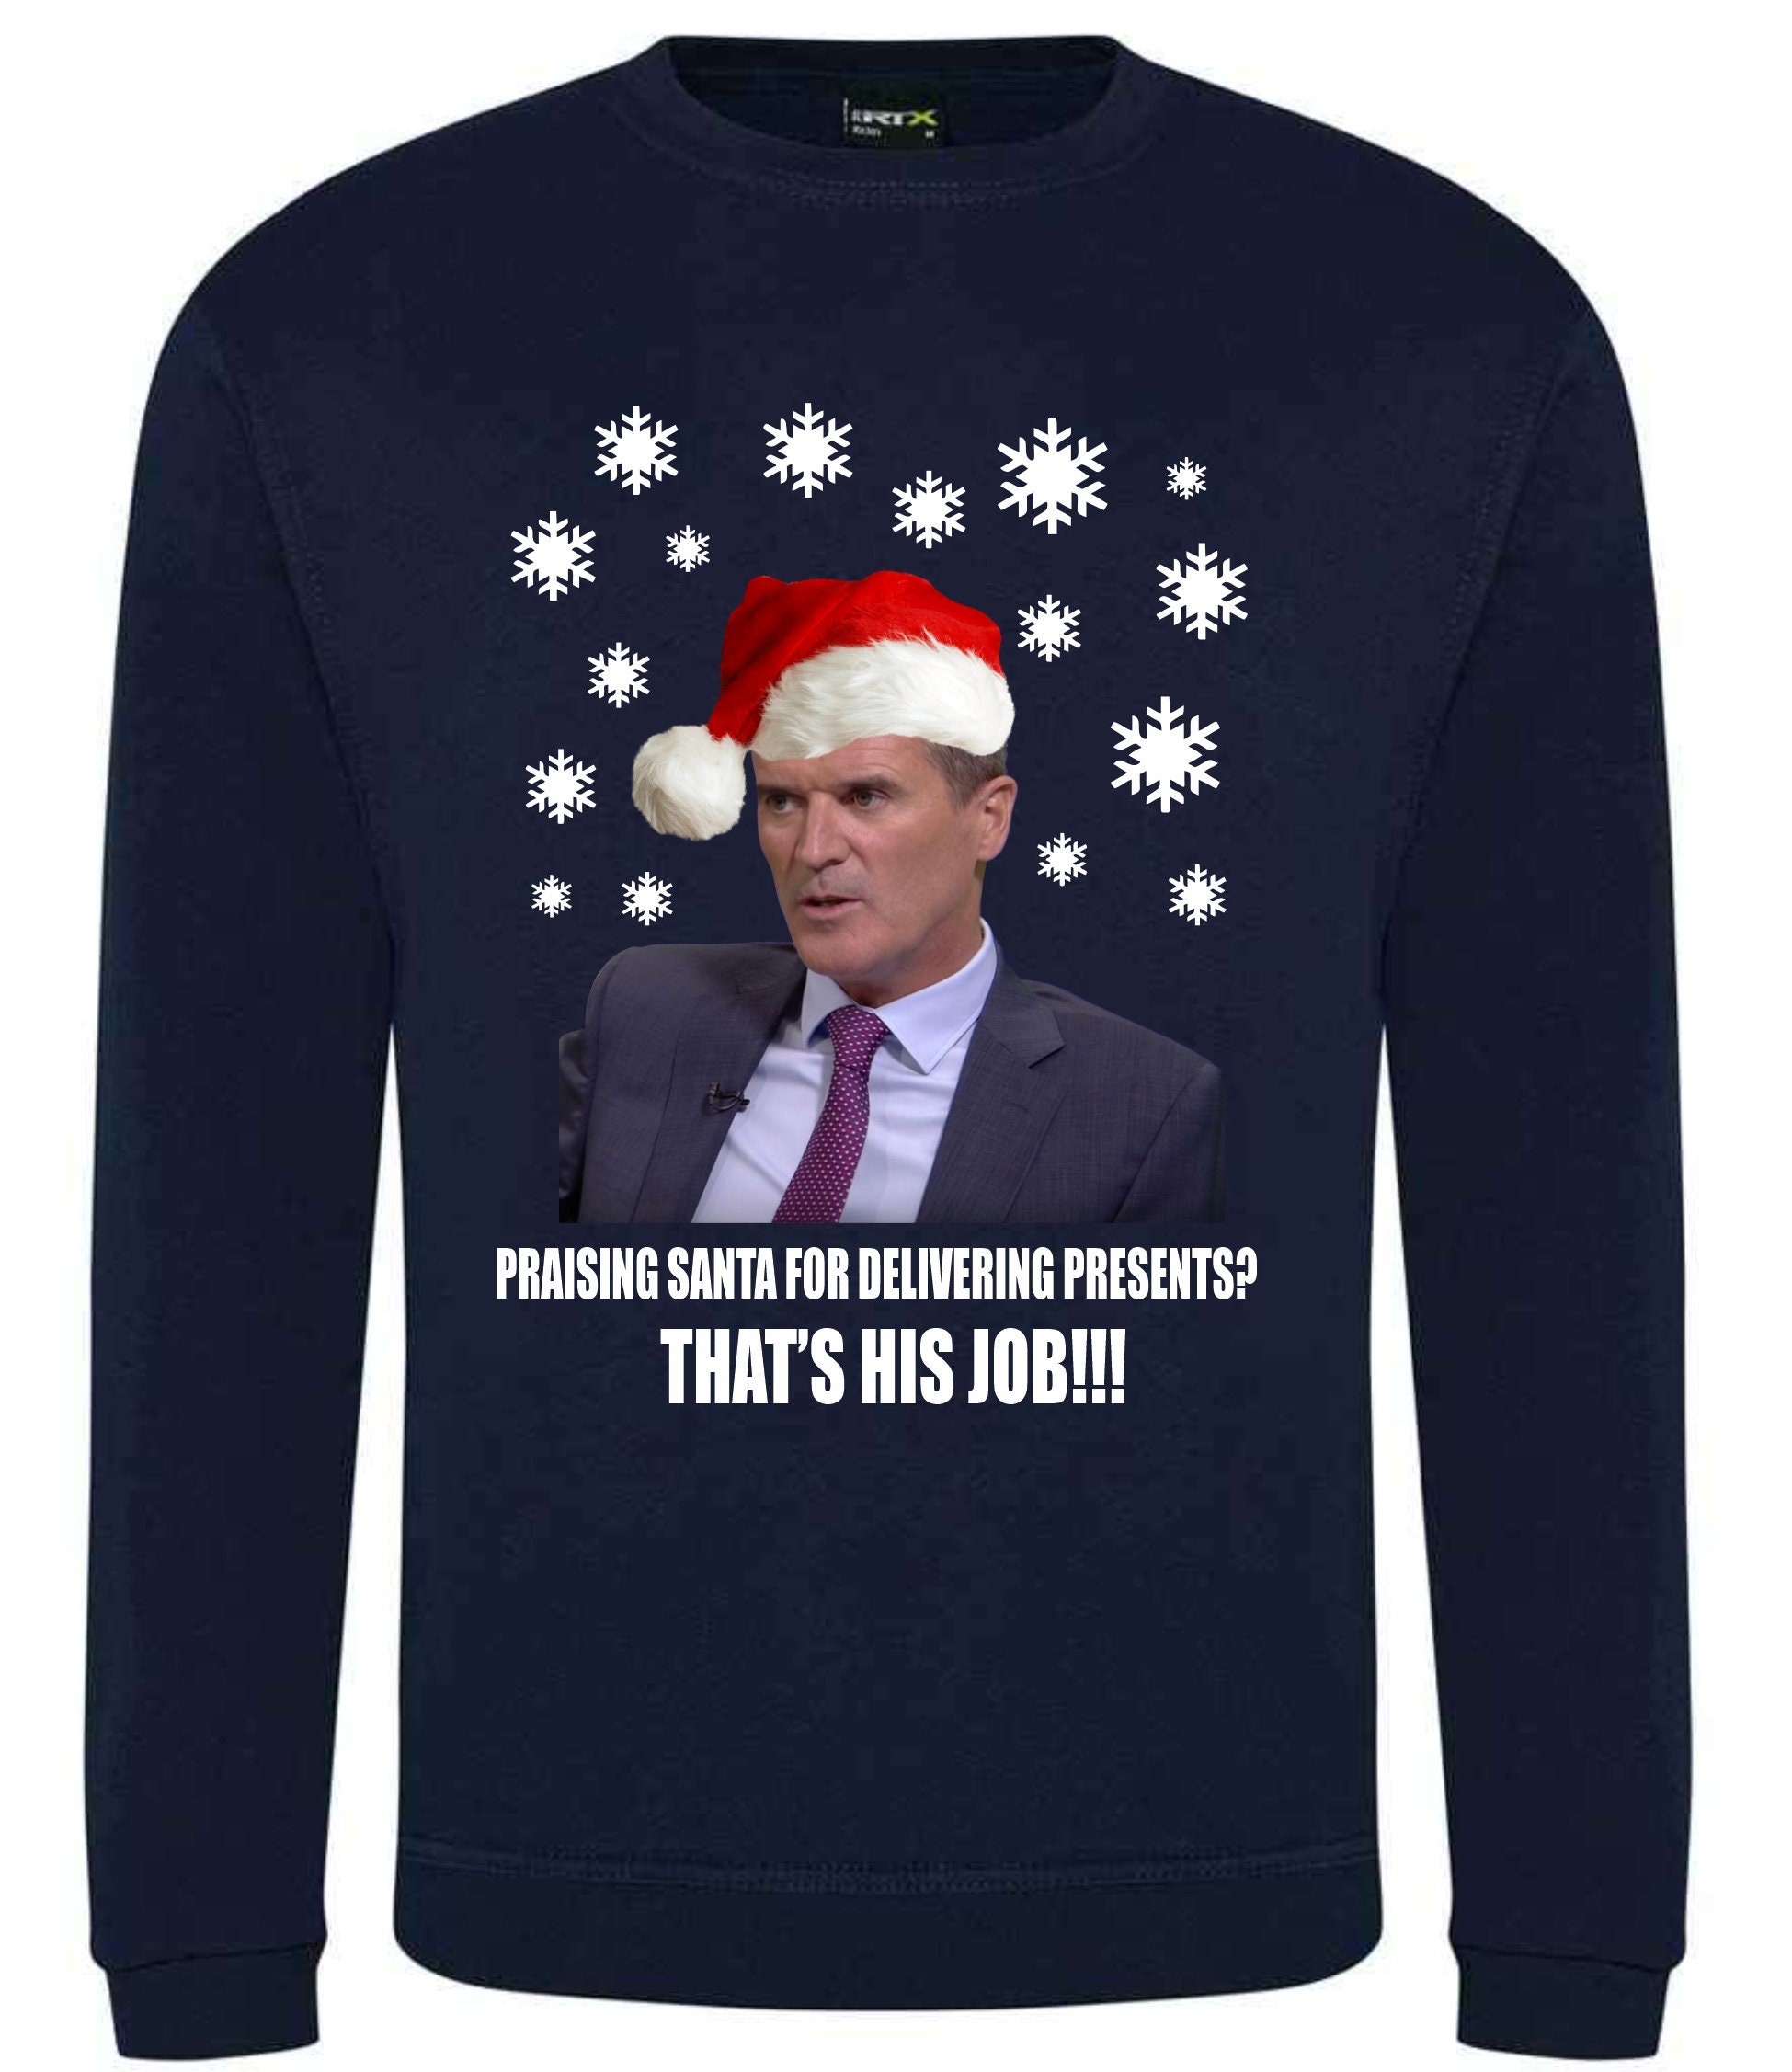 Discover Praising Santa For Delivering Presents, That's His Job, Roy Keane Funny Christmas sweater